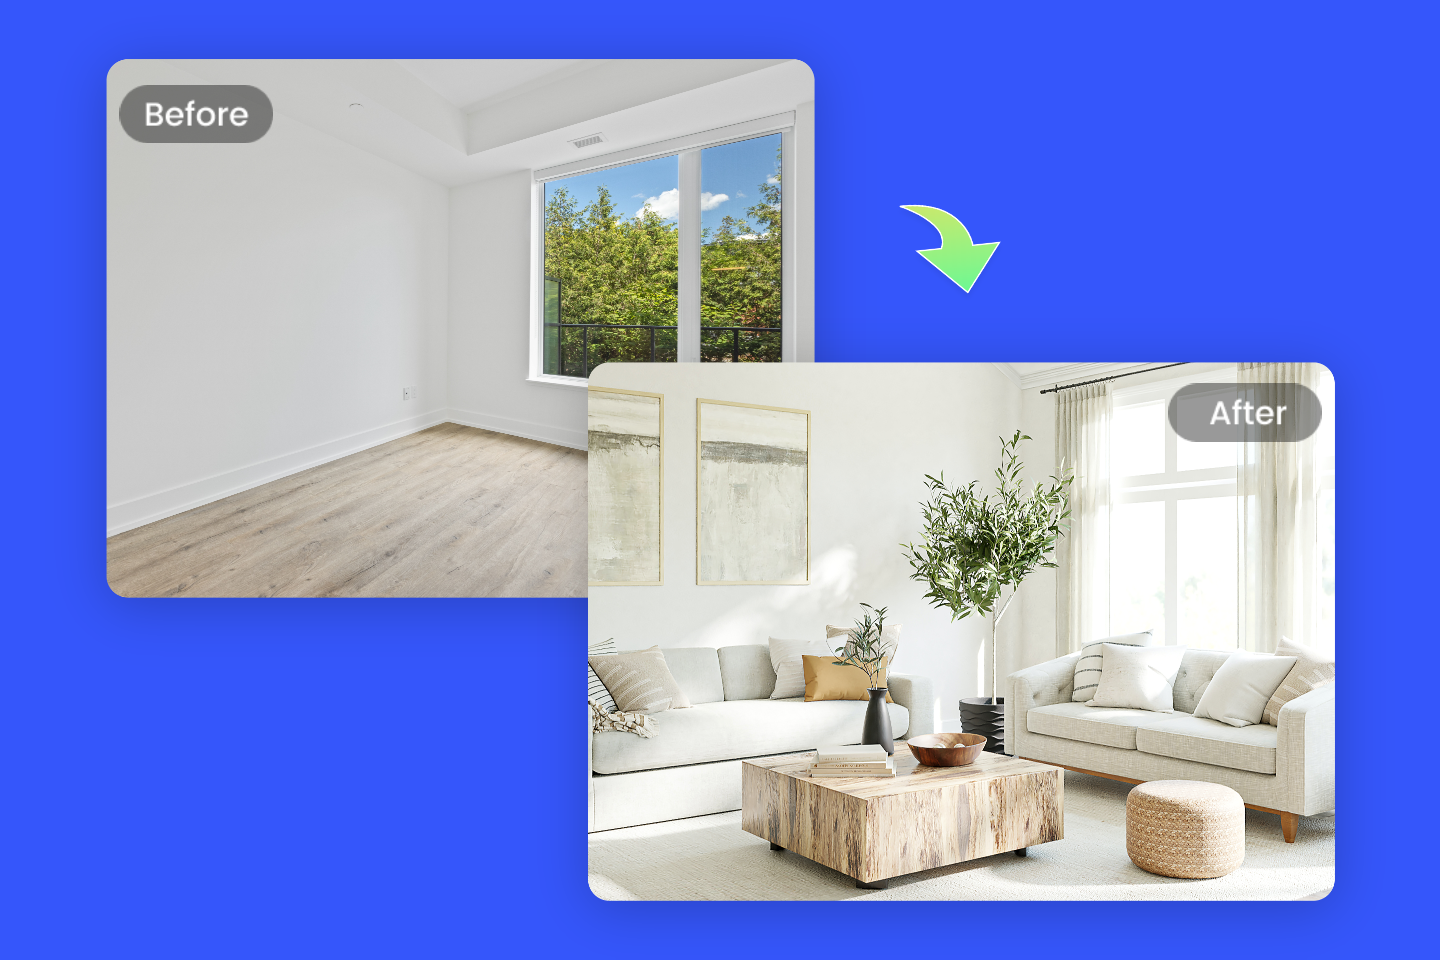 Use fotor ai interior deisgn tool to redesign the living room